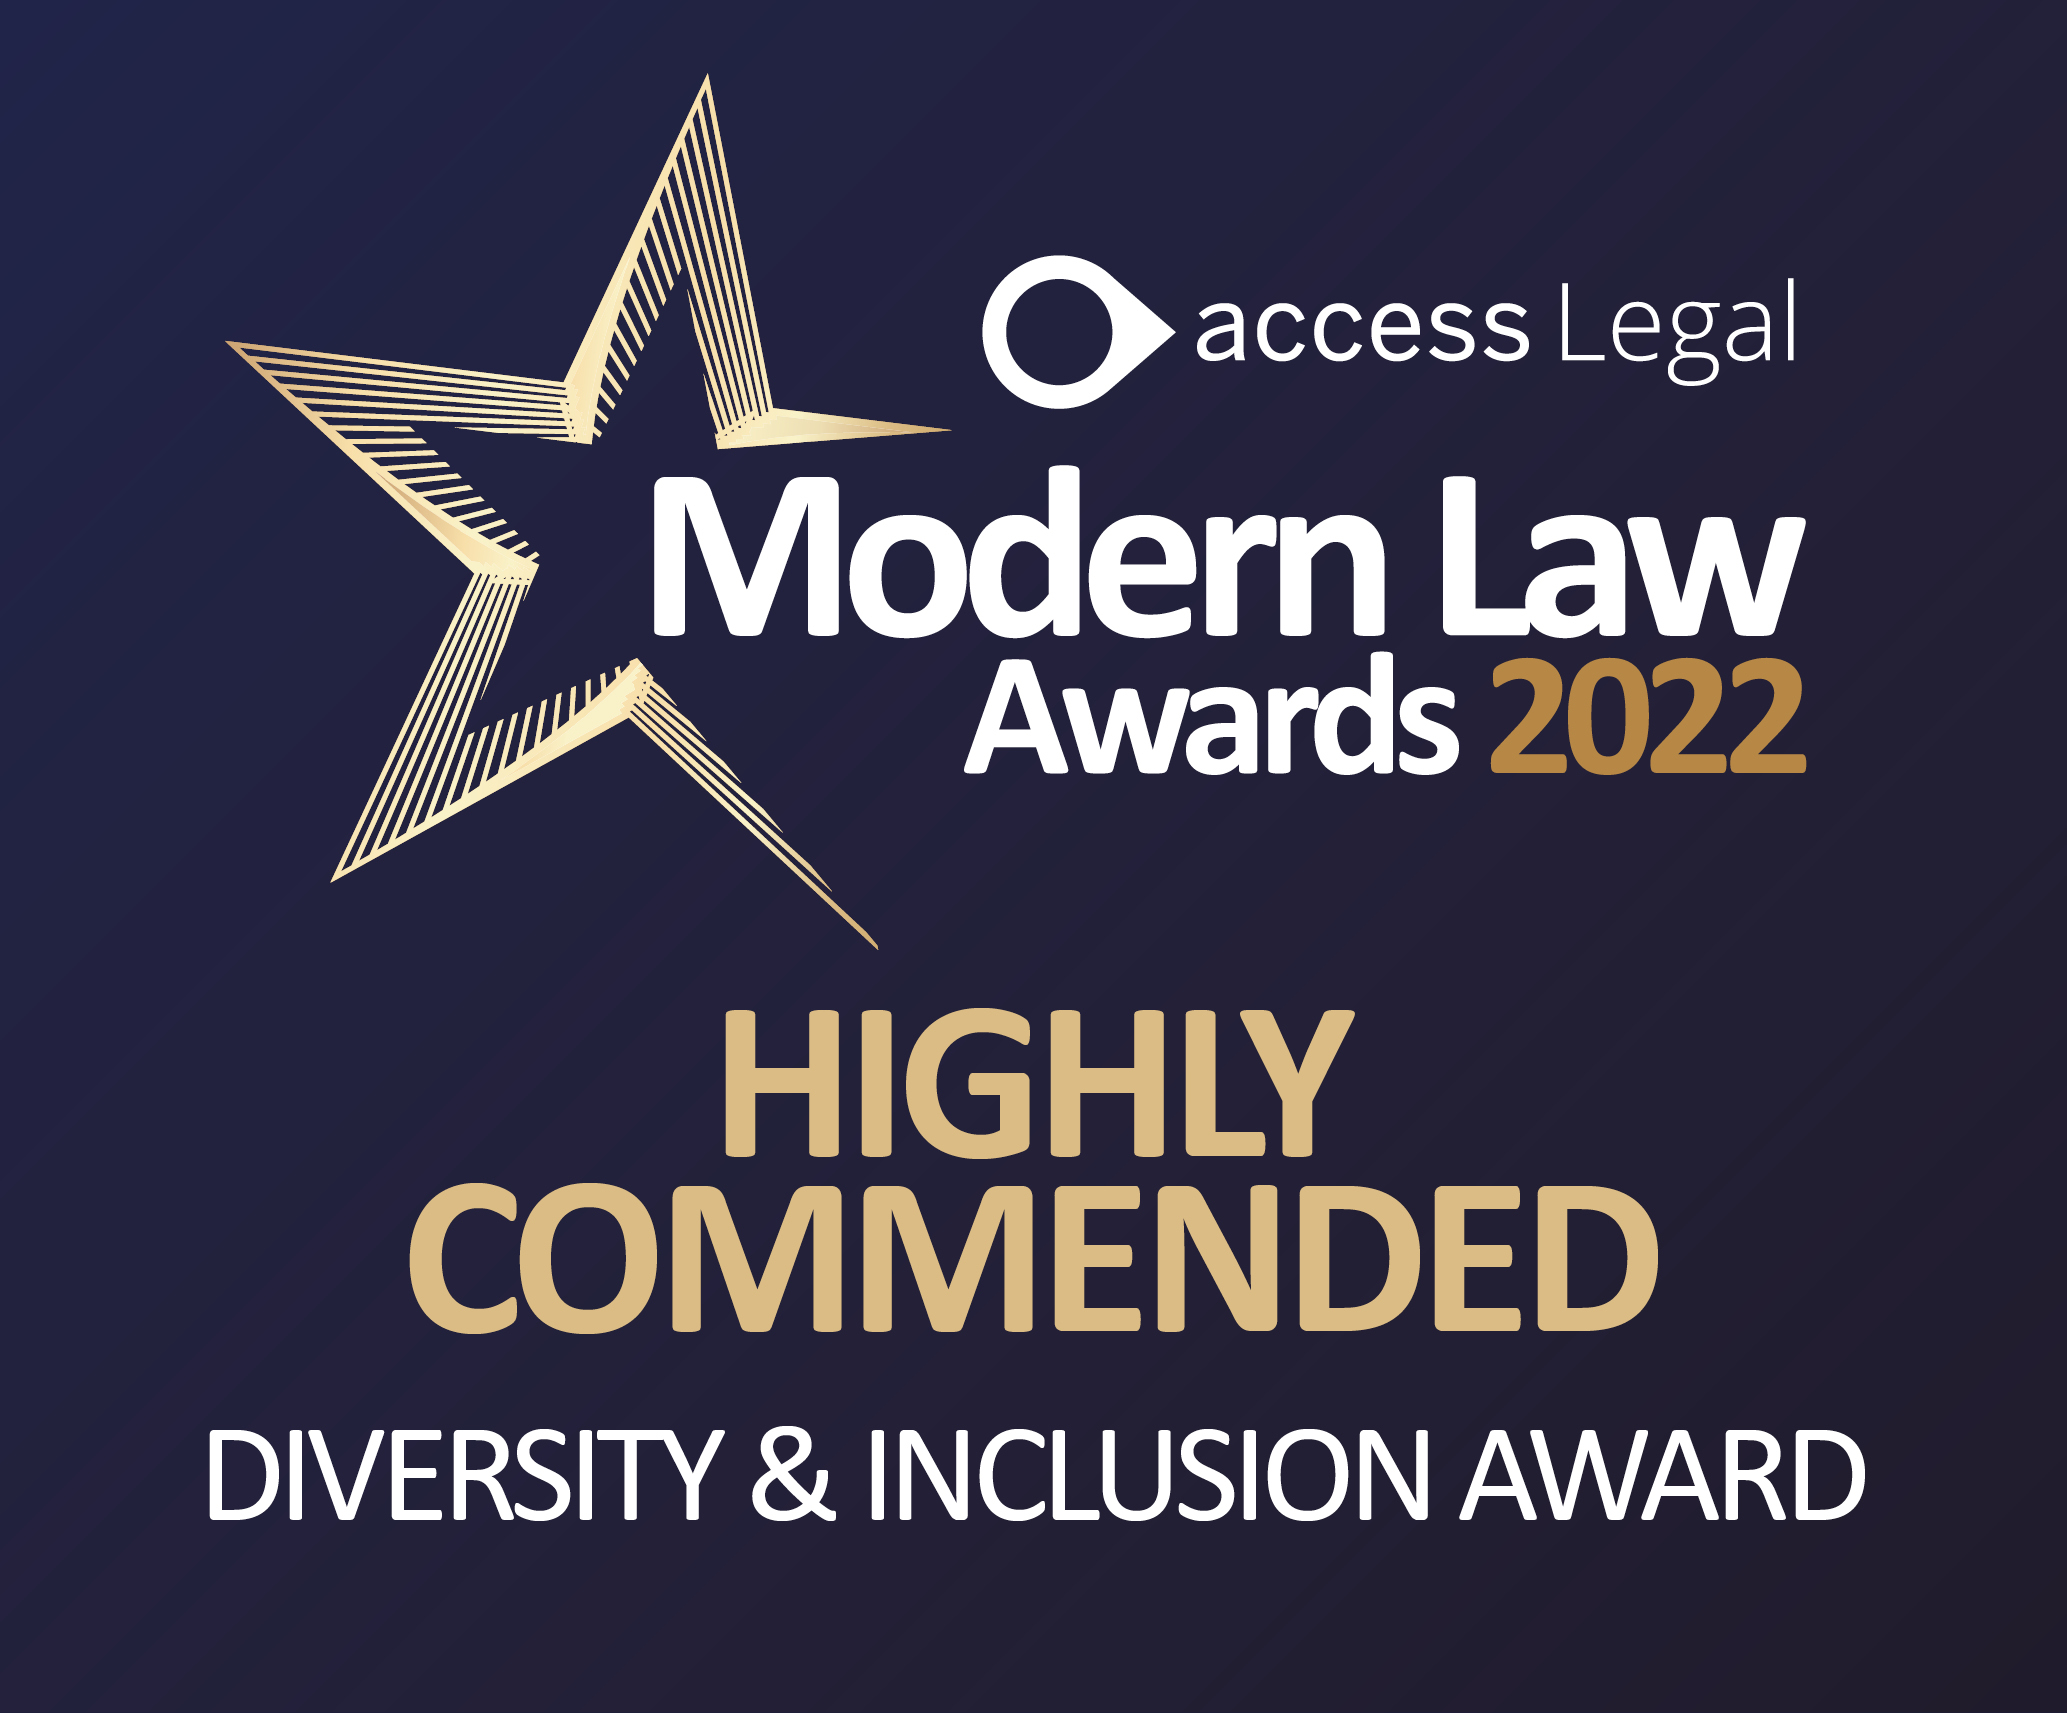 Diversity and Inclusion Award